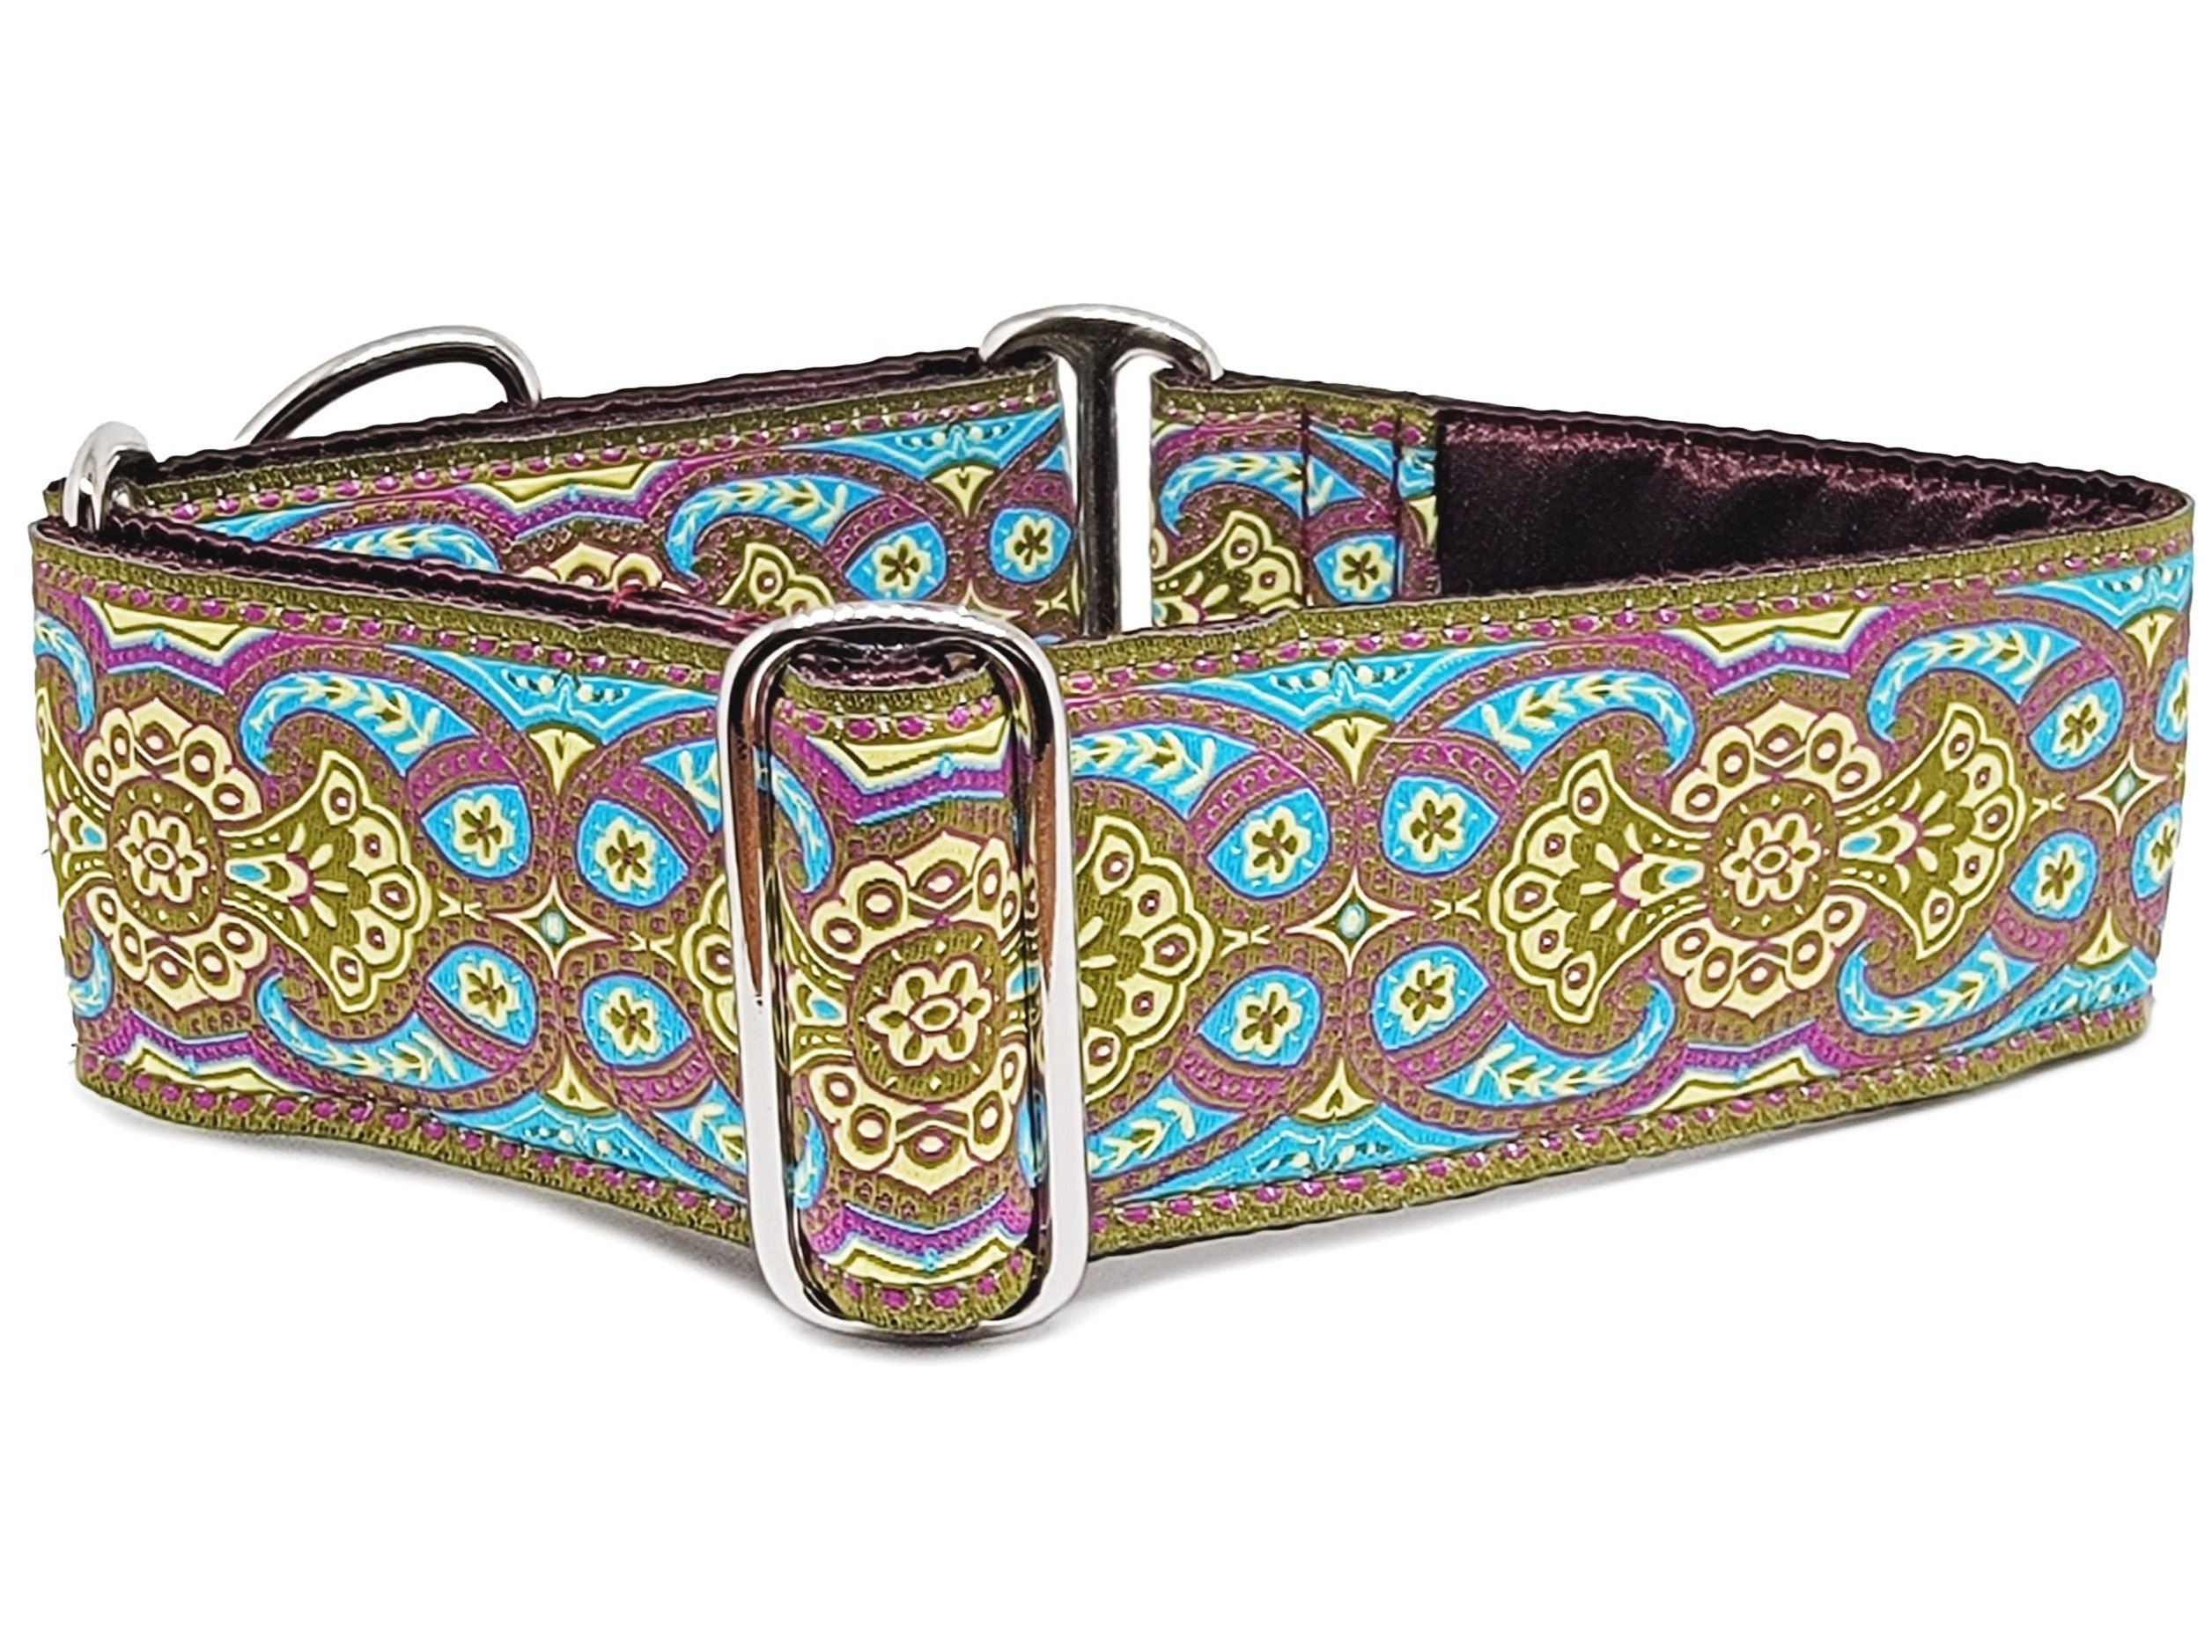 Marseilles Tapestry in Purple & Olive Green - Martingale or Buckle Dog Collar - 2" Width